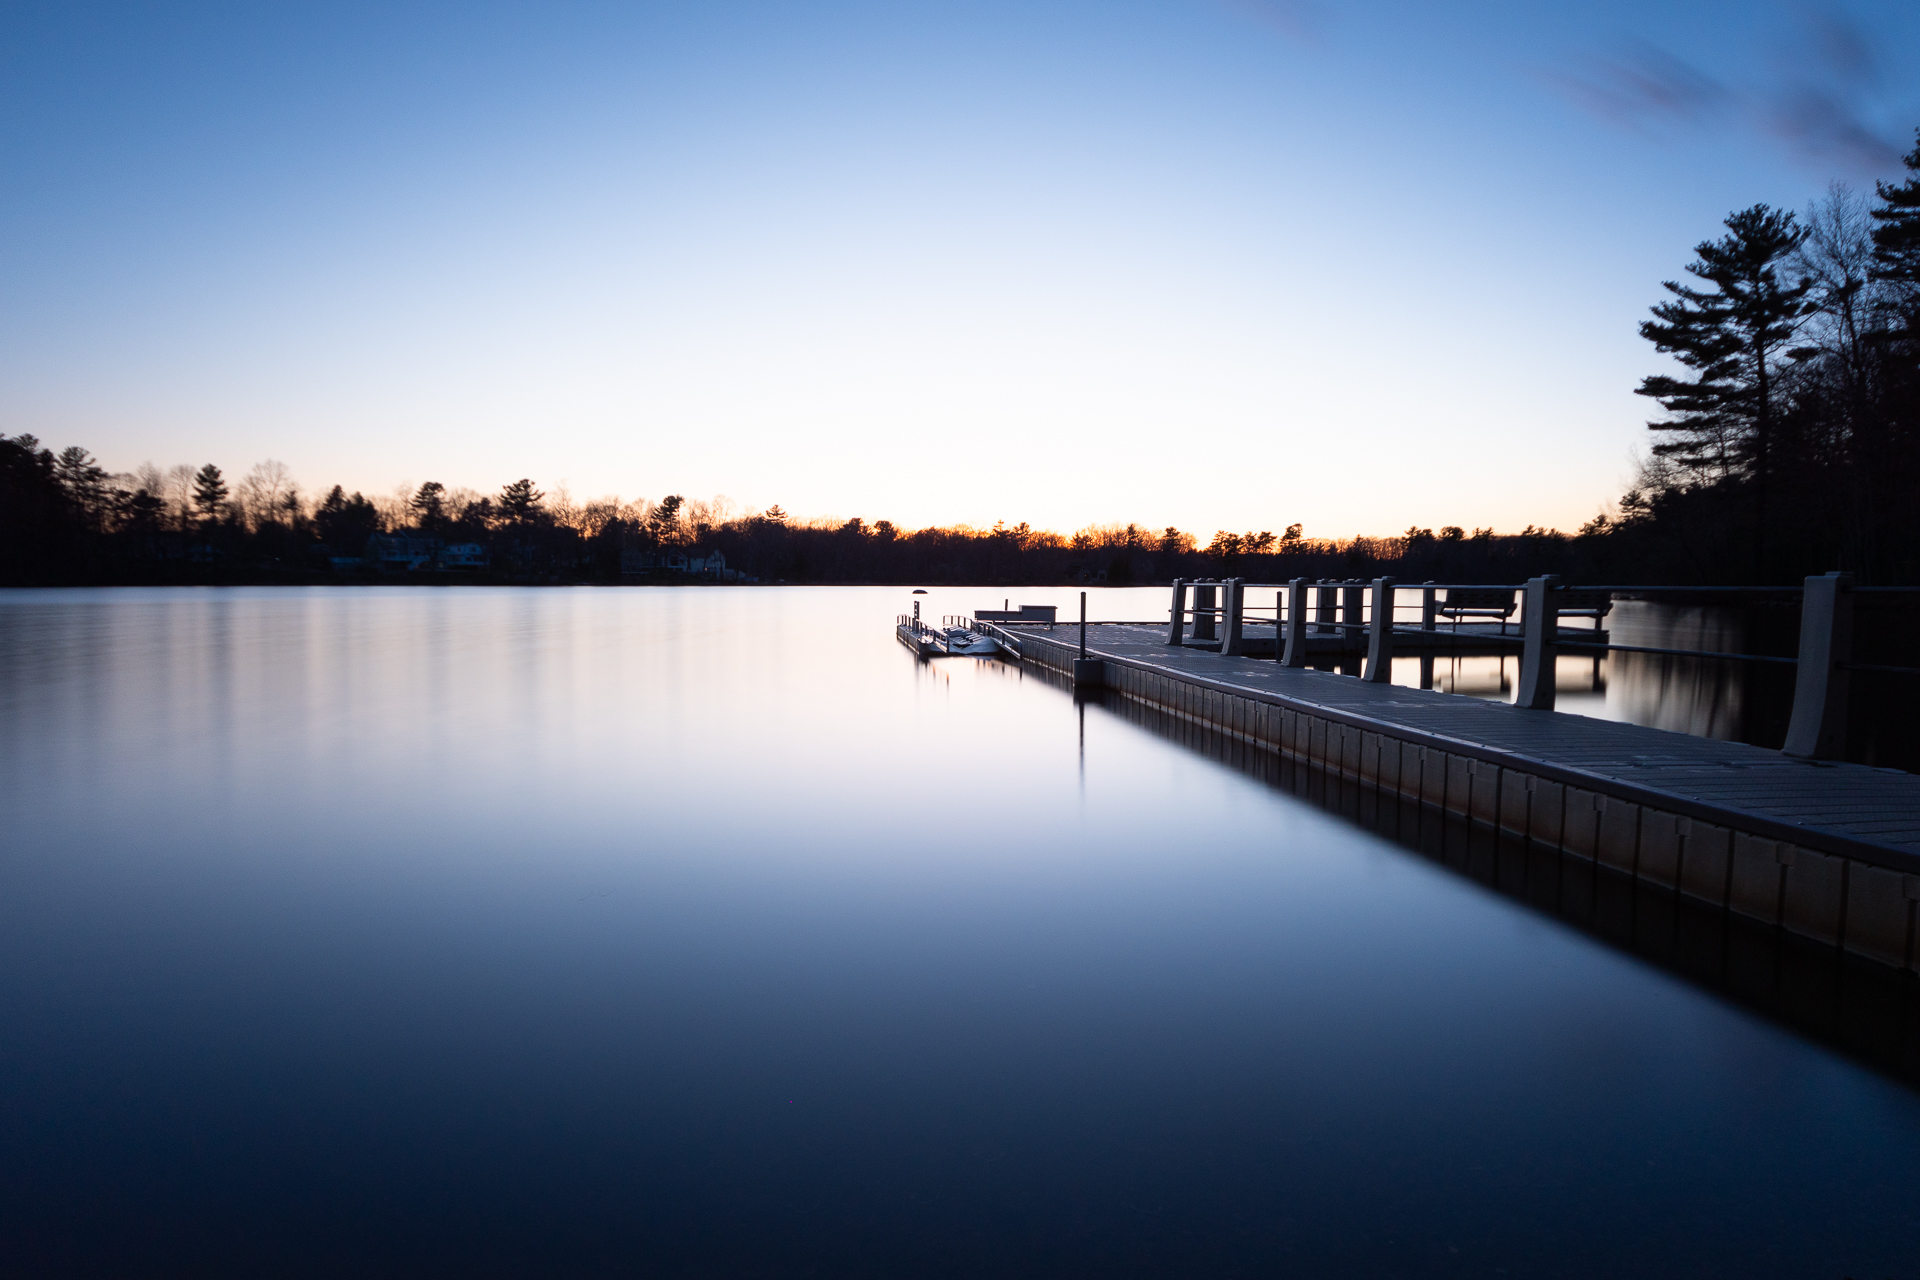 A long exposure of the dock at Jacobs Pond.